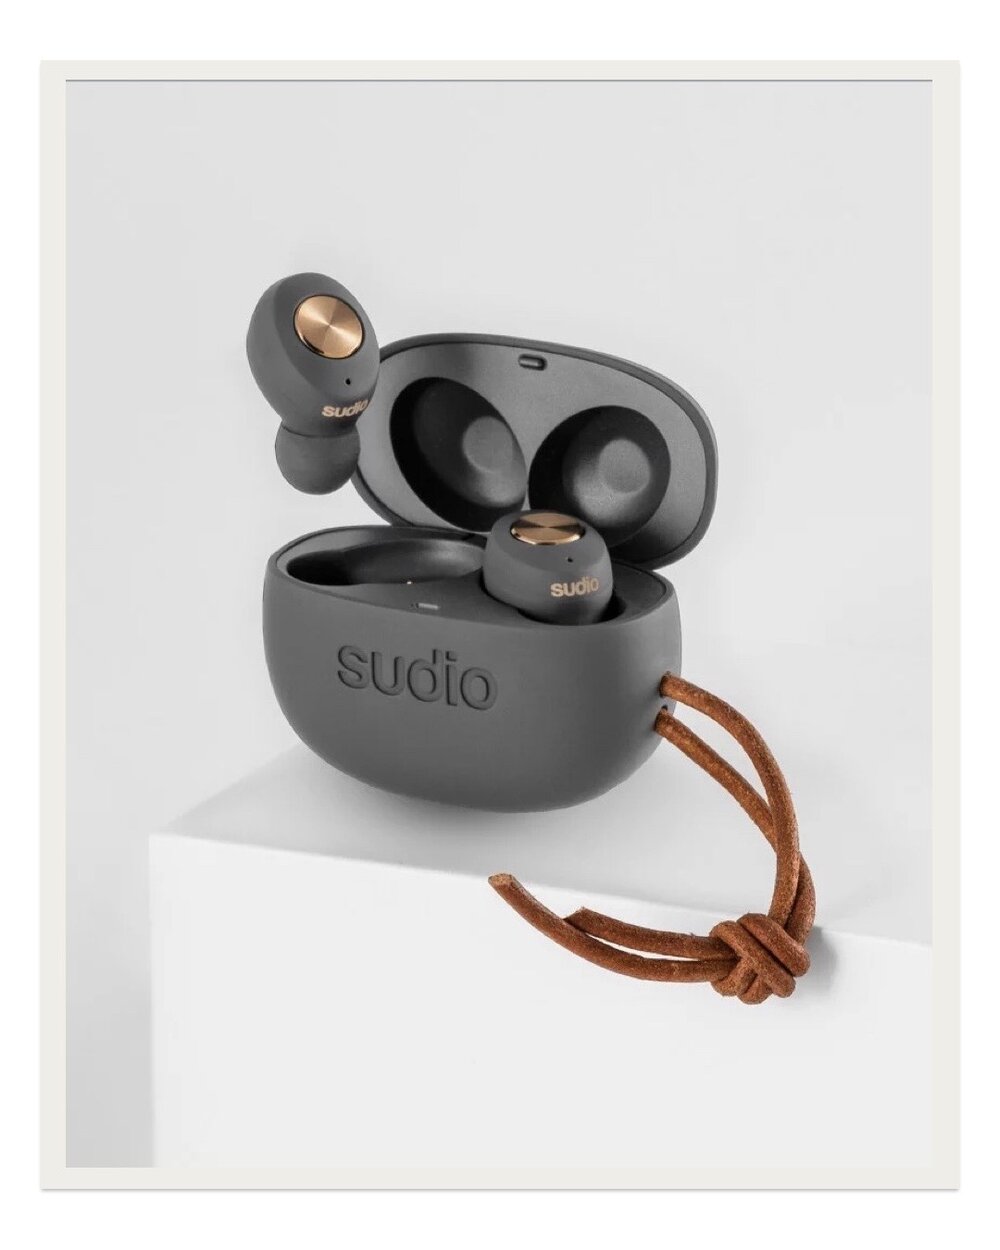 These wireless earbuds come in several different colors and pair seamlessly via bluetooth to get you grooving to your favorite tunes. Music can instantly change my mood, and I love having hands-free and cords-free access to it any time of day without disturbing those around me.